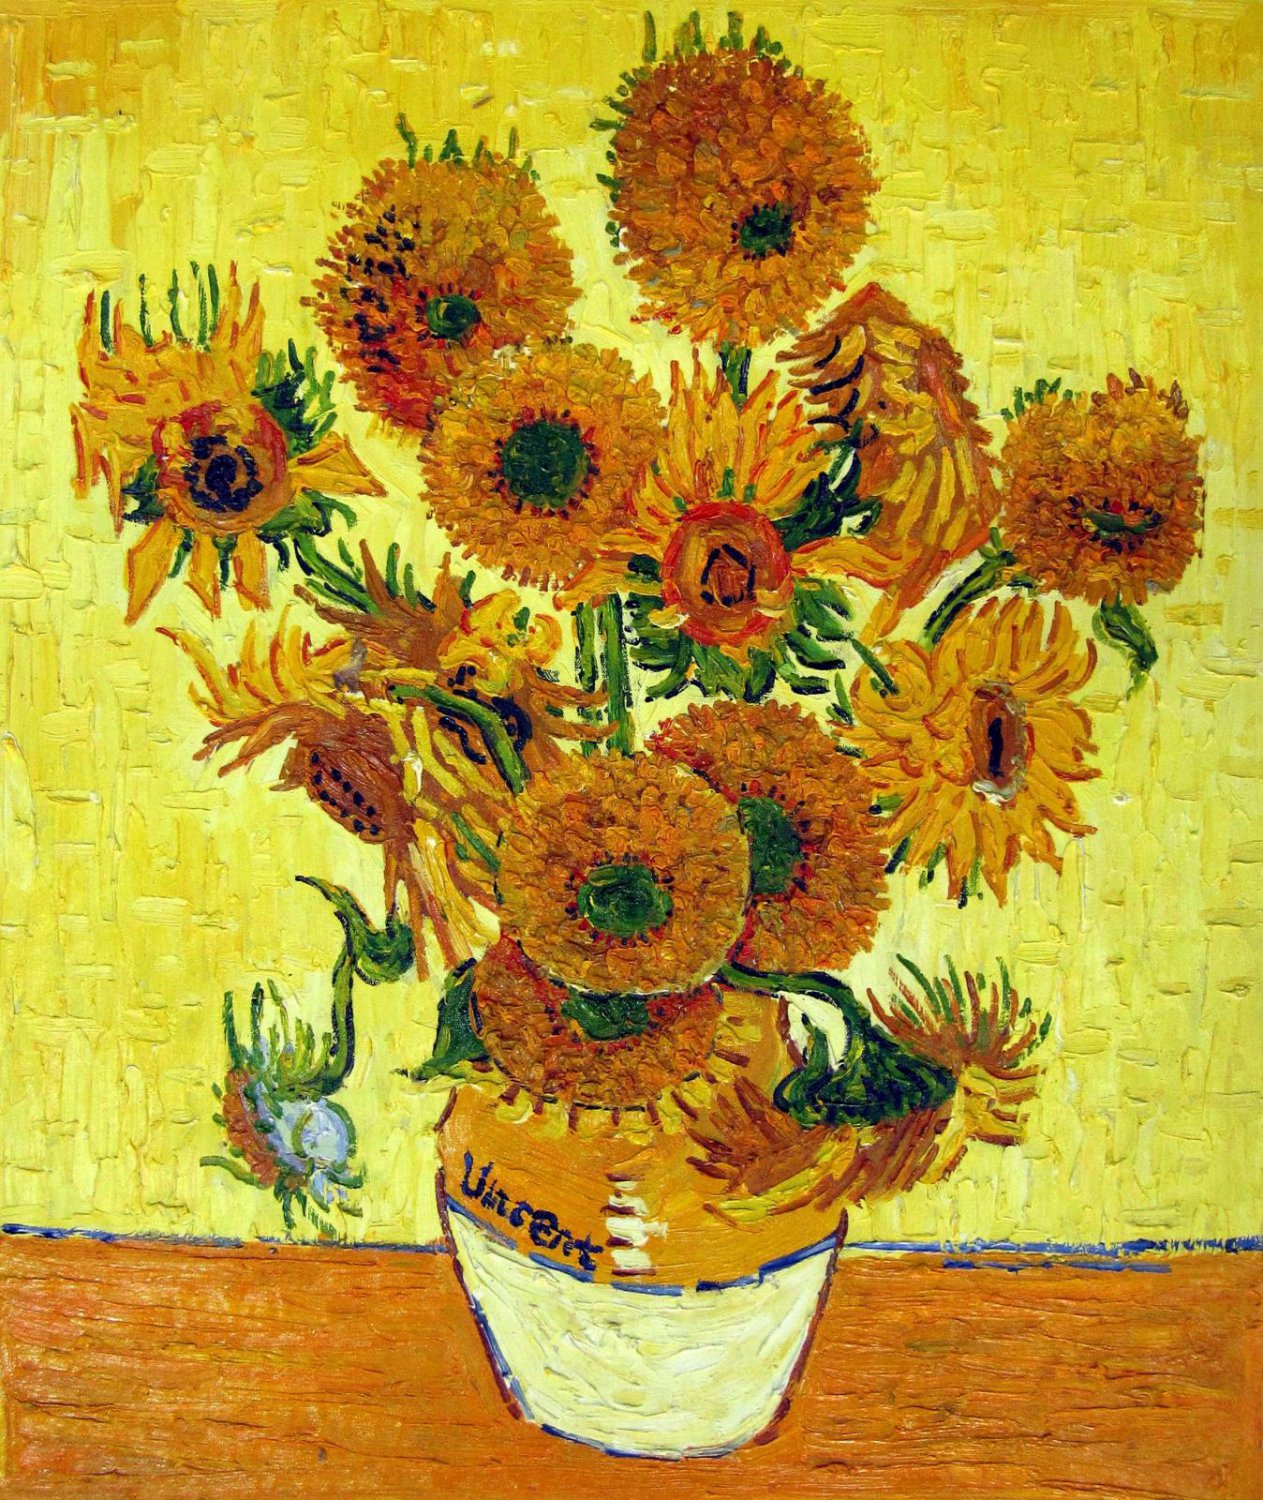 Rep. Vencent Van Gogh 20x24 in. stretched Oil Painting Canvas Art Wall Decor modern101